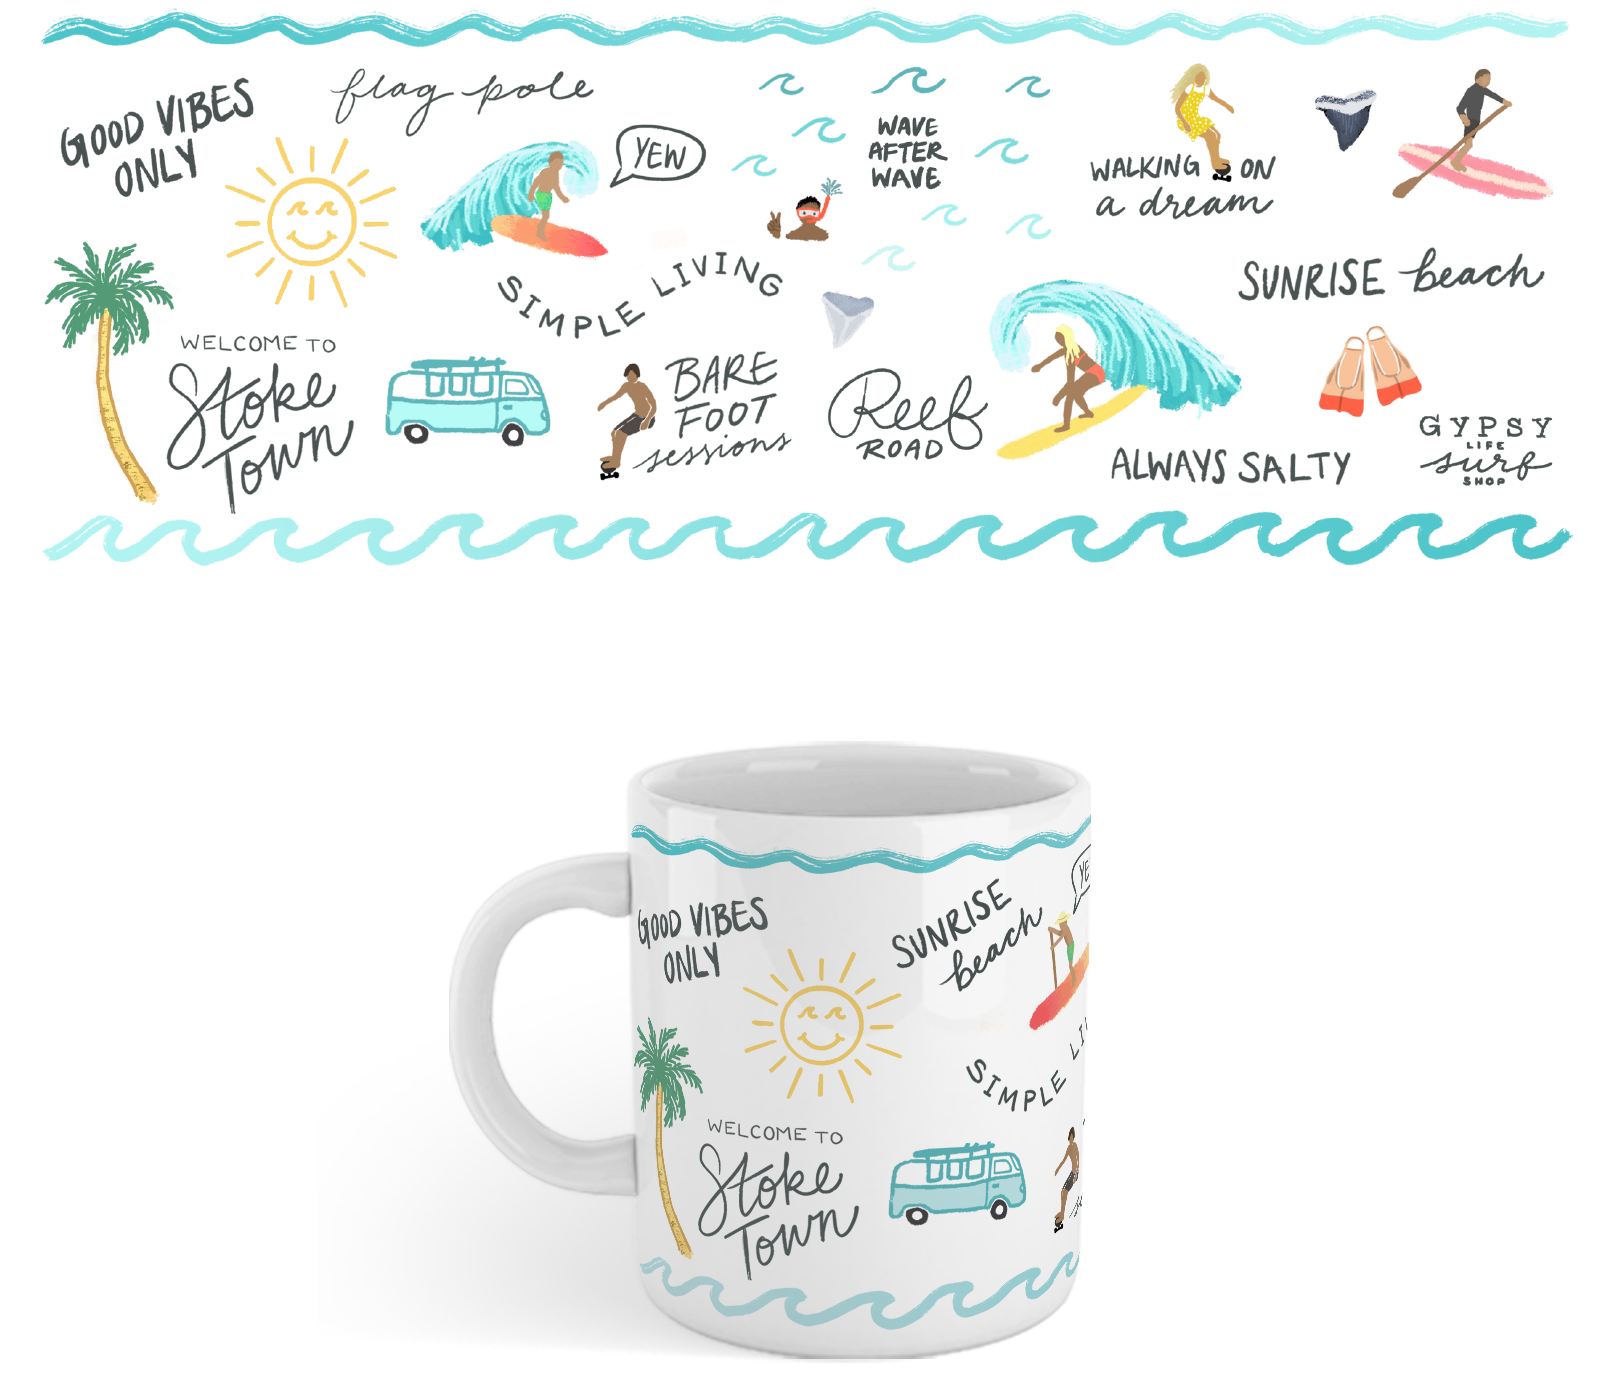 Illustrated mug design featuring hand lettering and custom illustrations of surfers, skaters, a happy face sun, palm trees, shark tooth, snorkeler, VW Bus, and paddle boarder.